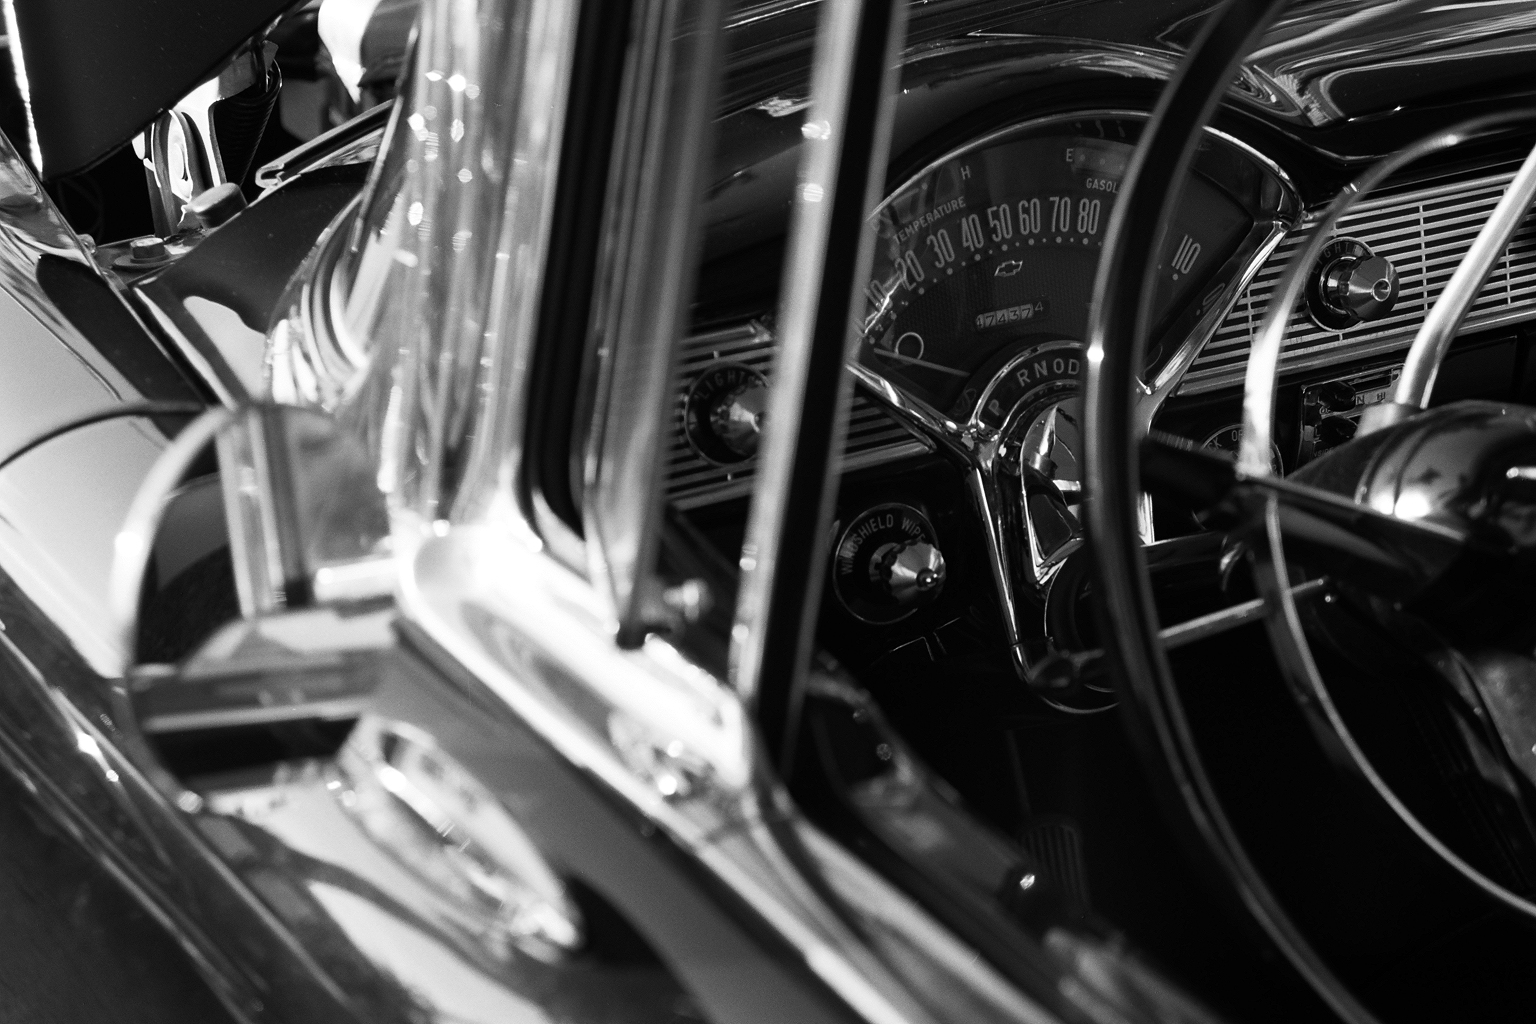 an old, black - and - white po shows the dash board of a classic car